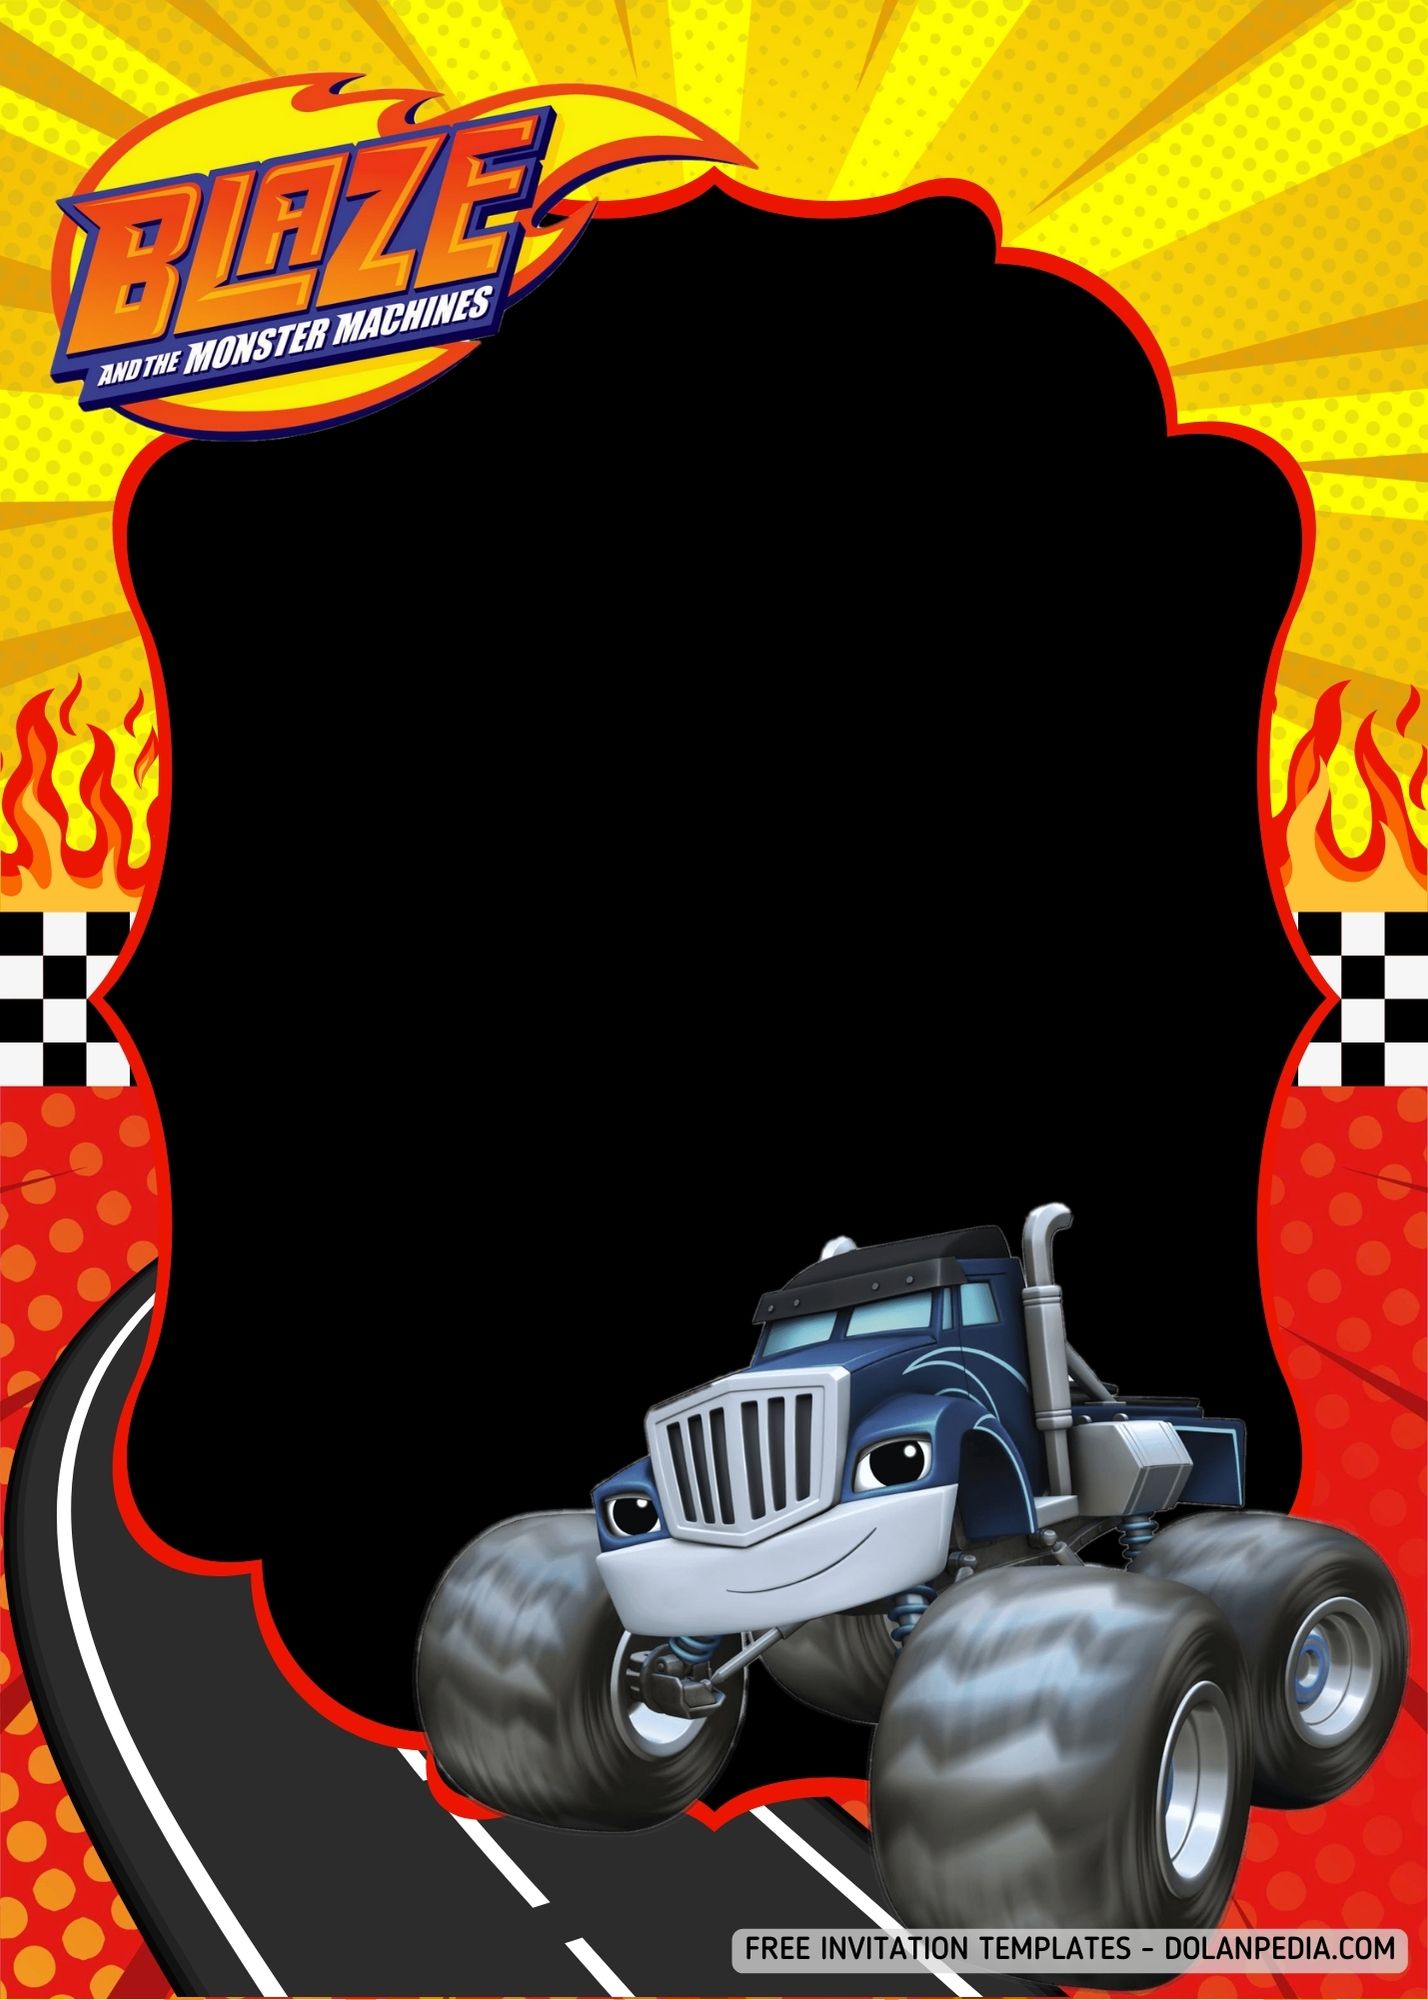 FREE Blaze & Monster Machines Outdoor Race Party Invitation Templates